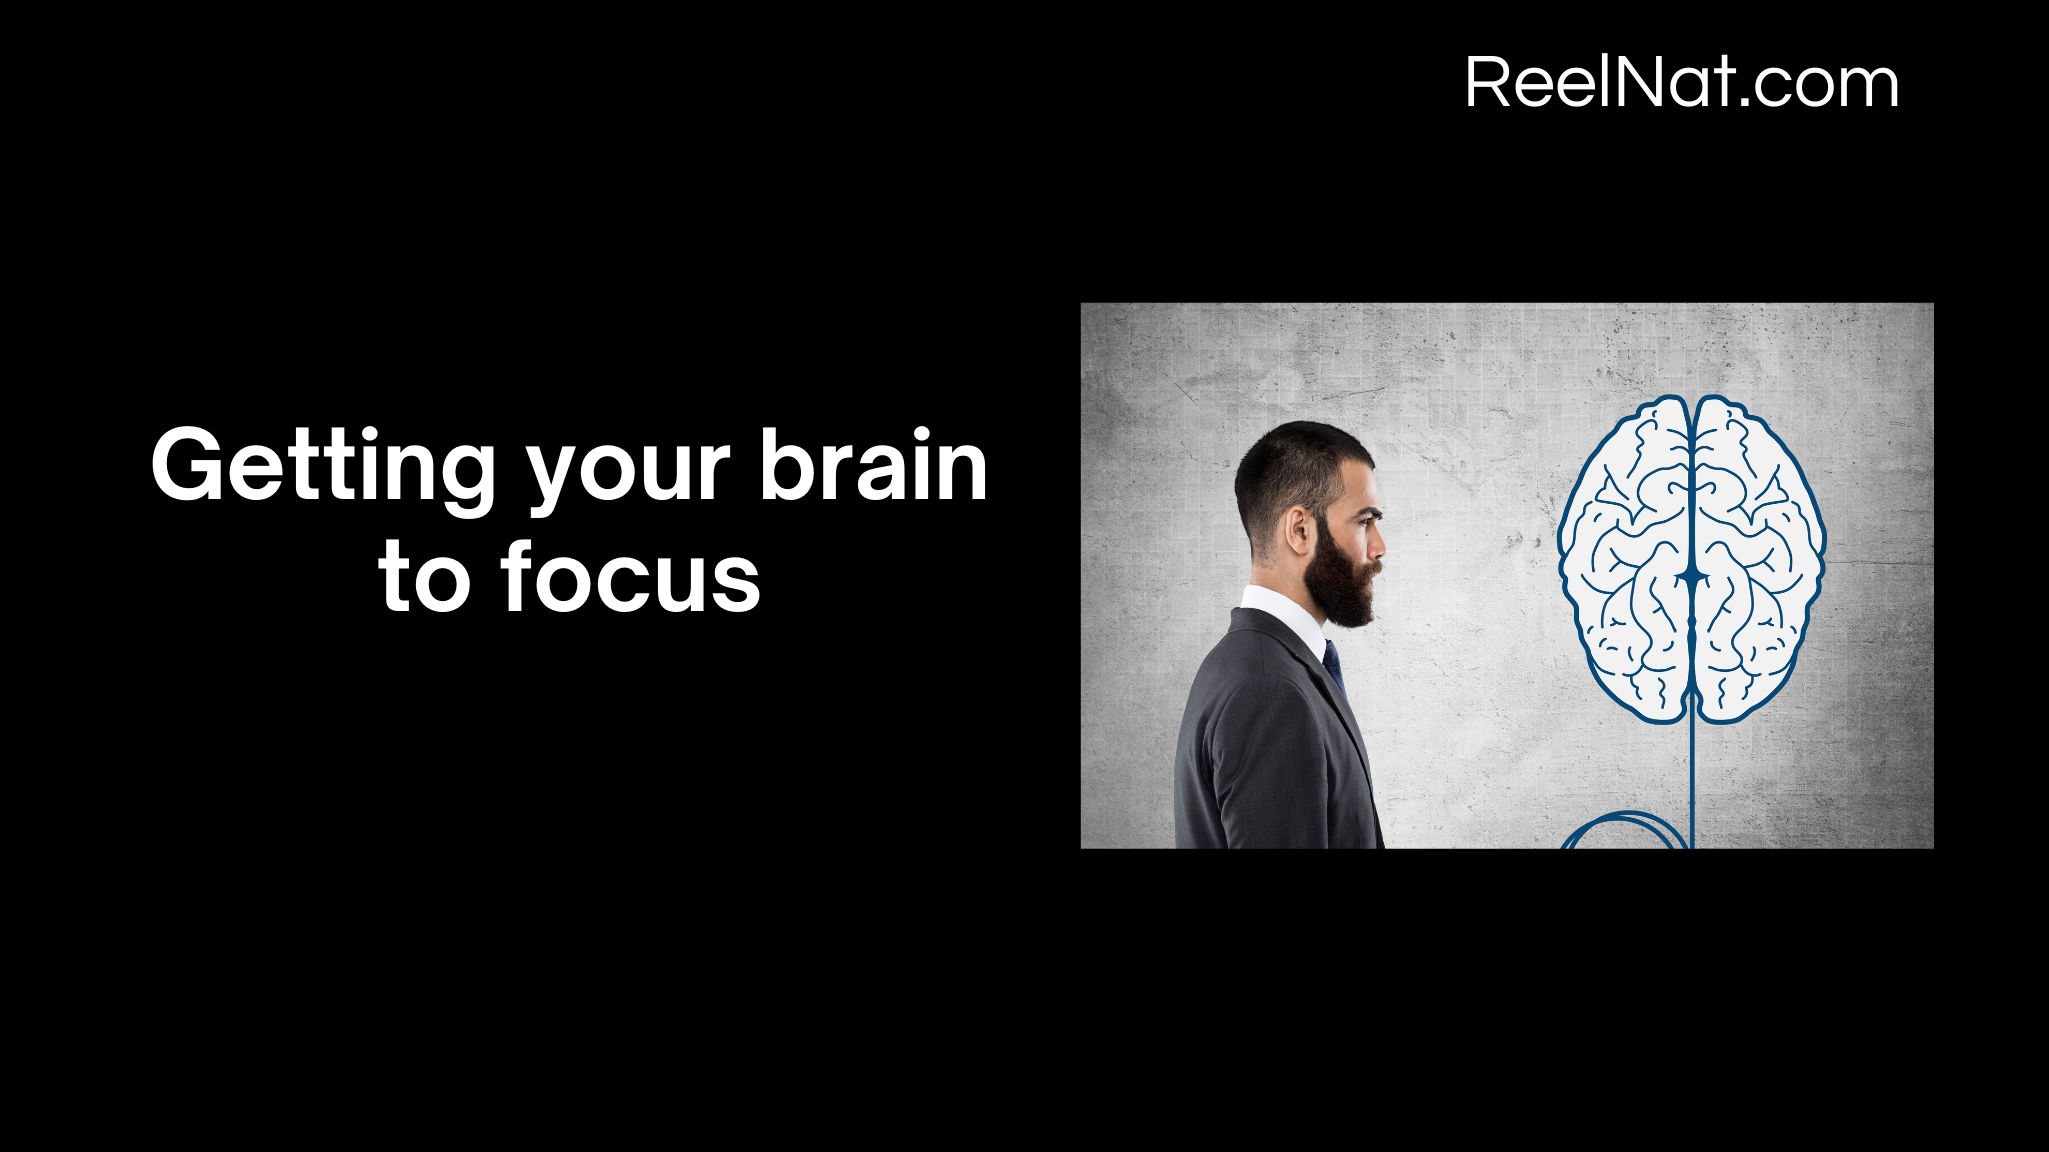 Getting your brain to focus